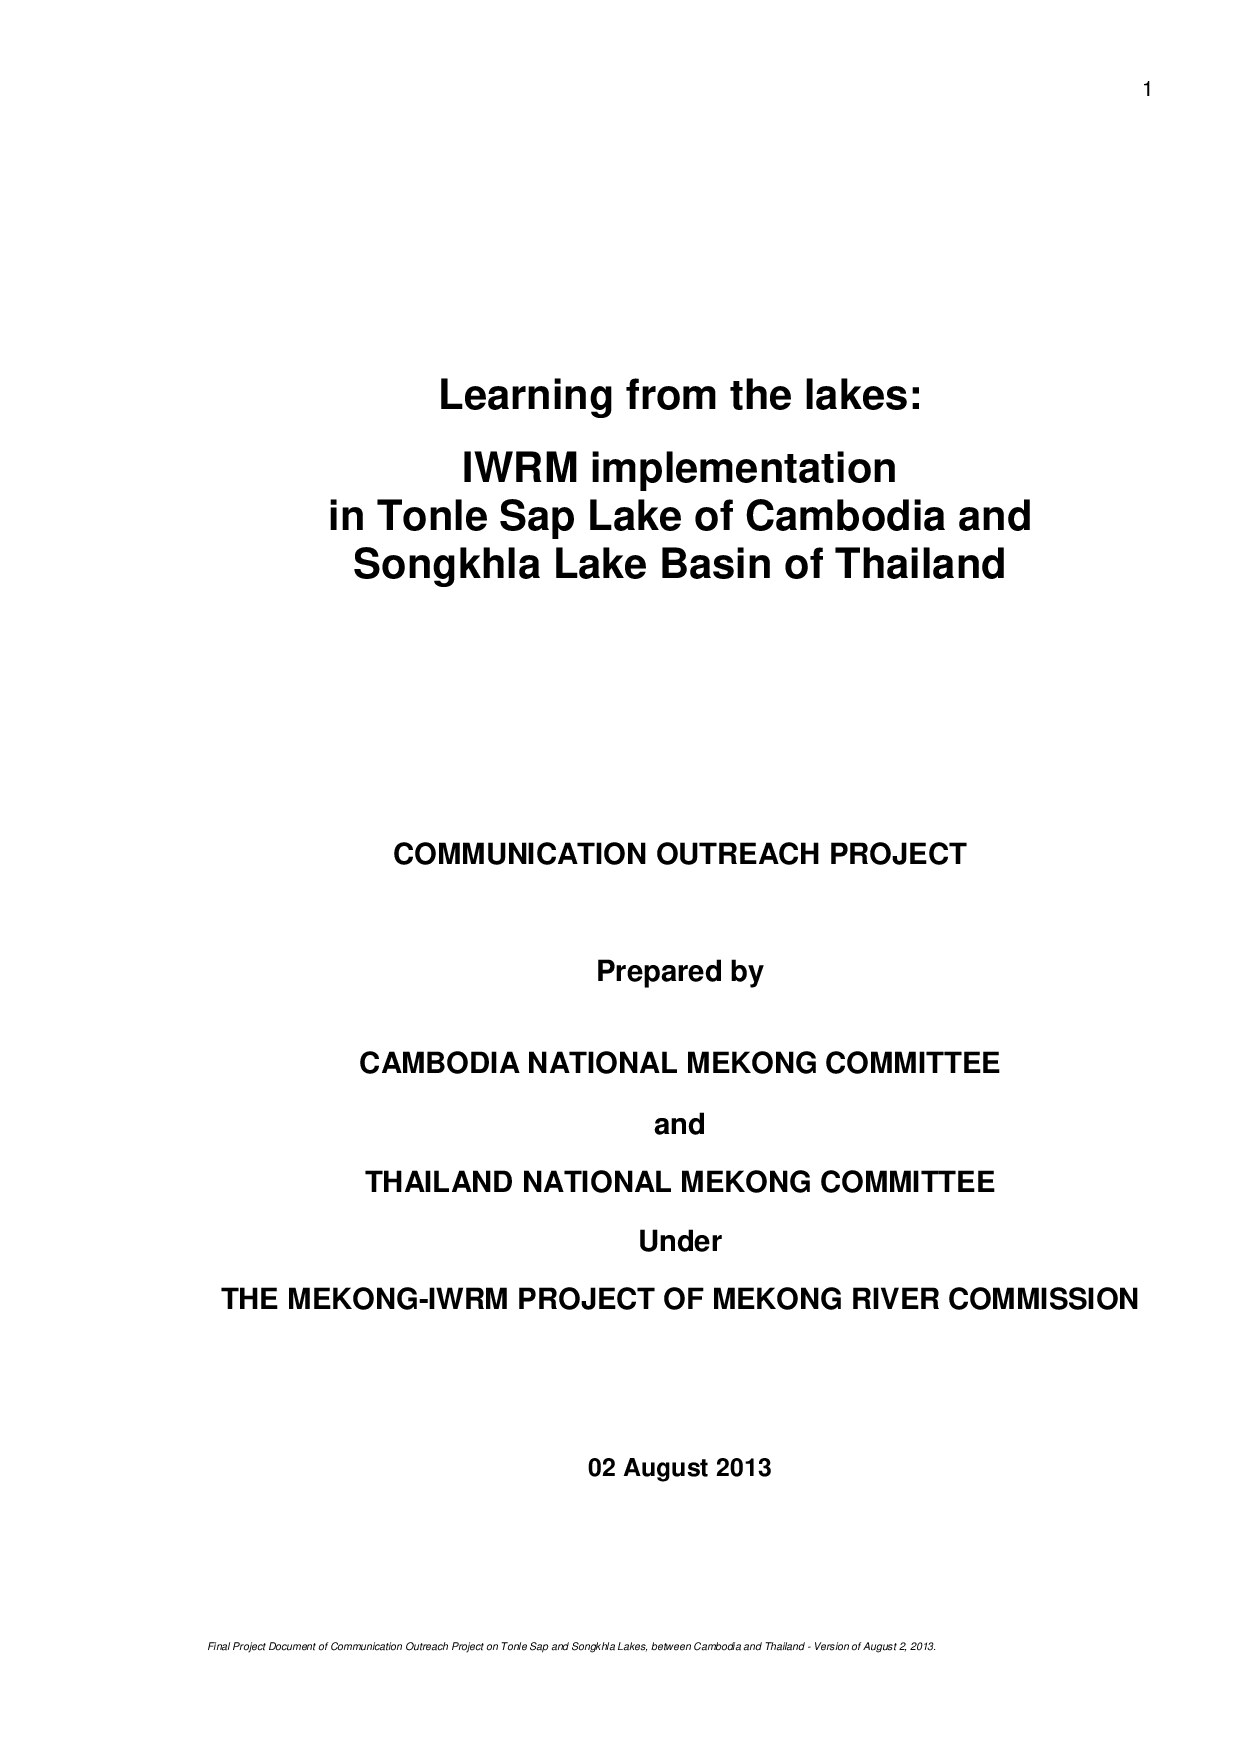 IWRM implementation in Tonle Sap Lake of Cambodia and Songkhla Lake Basin of Thailand.